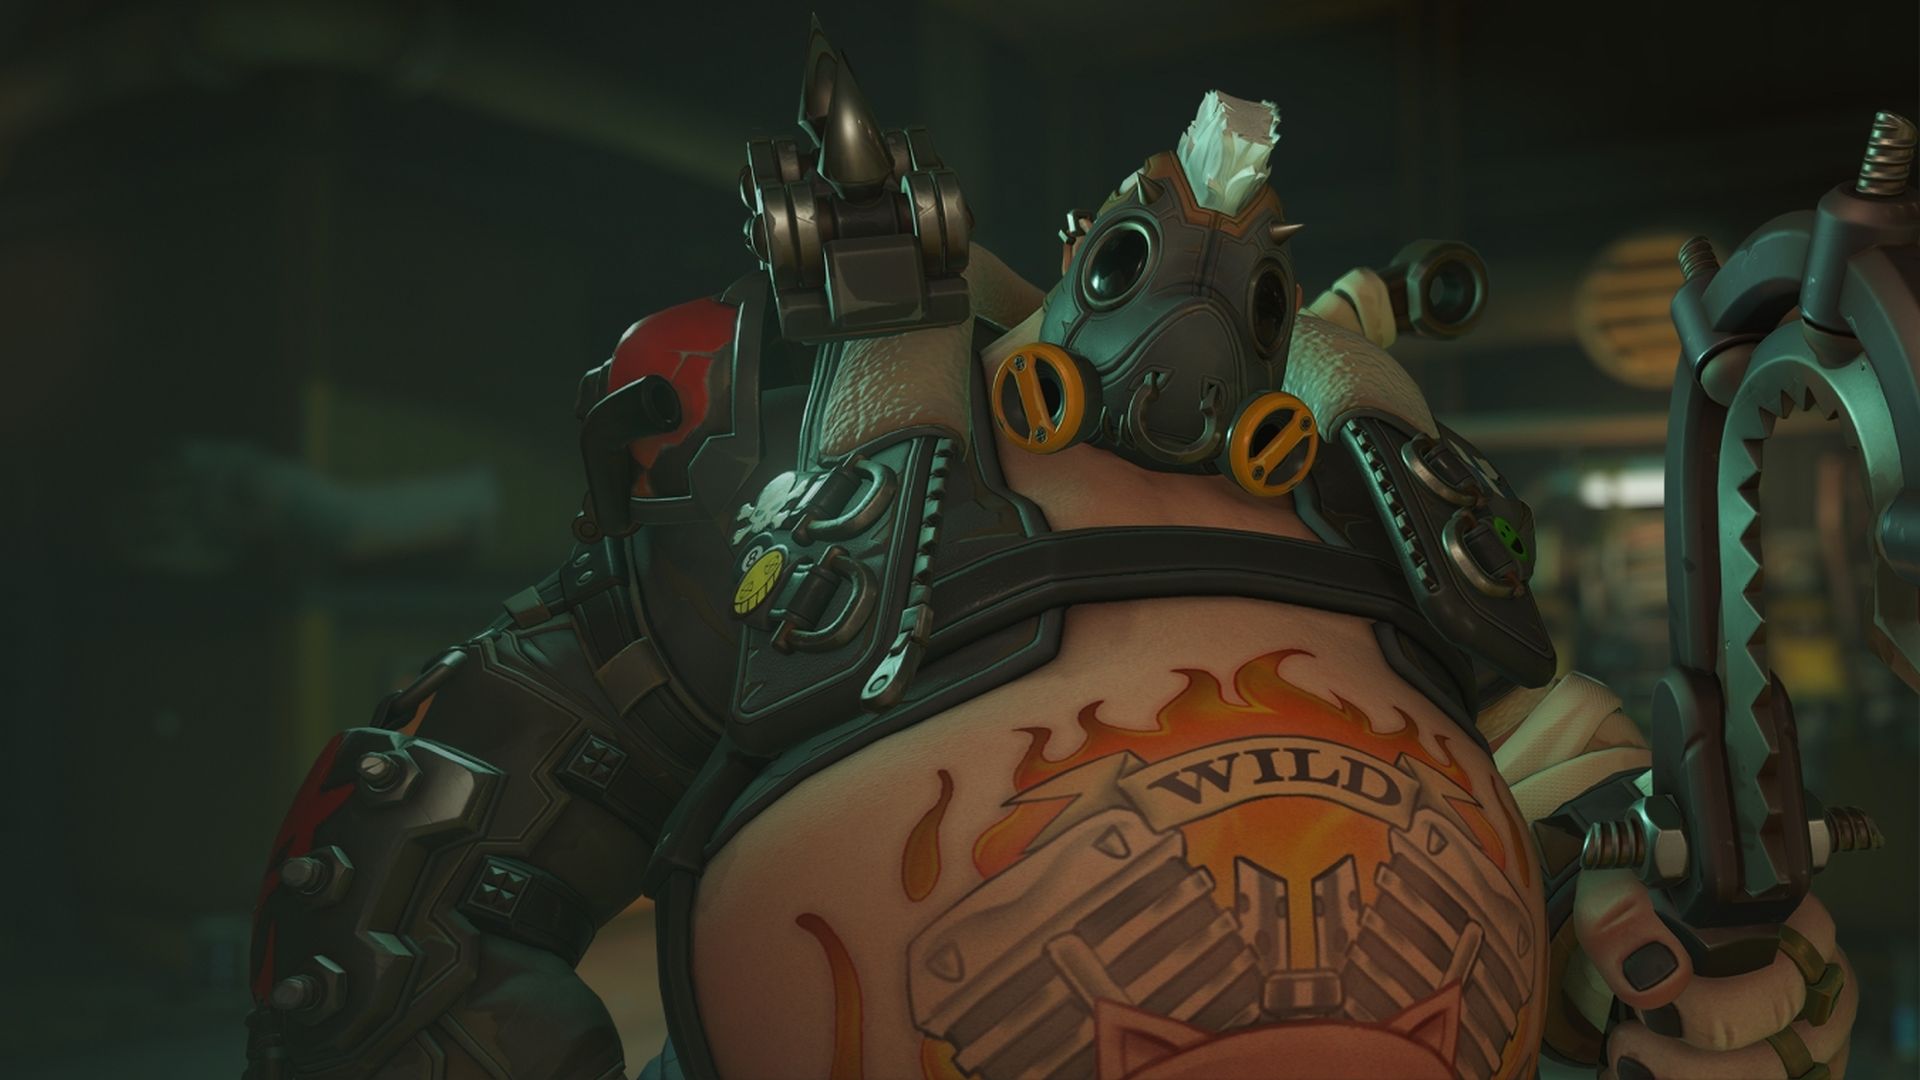 Overwatch 2 Patch Buffs HP Recovery, Damage Reduction for Roadhog’s Take a Breather